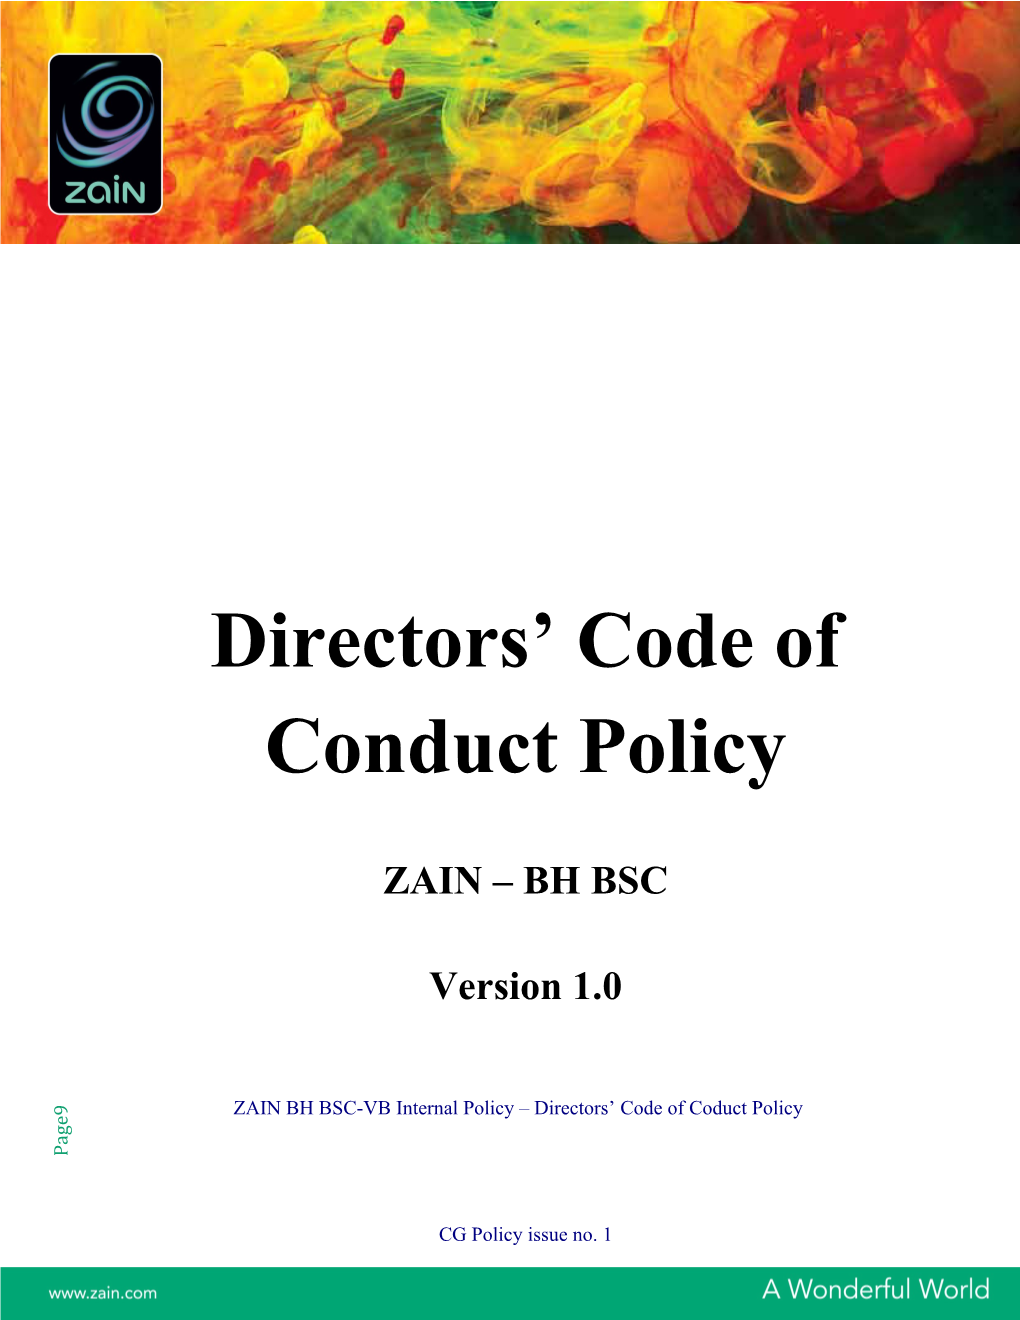 Directors Code of Conduct Policy